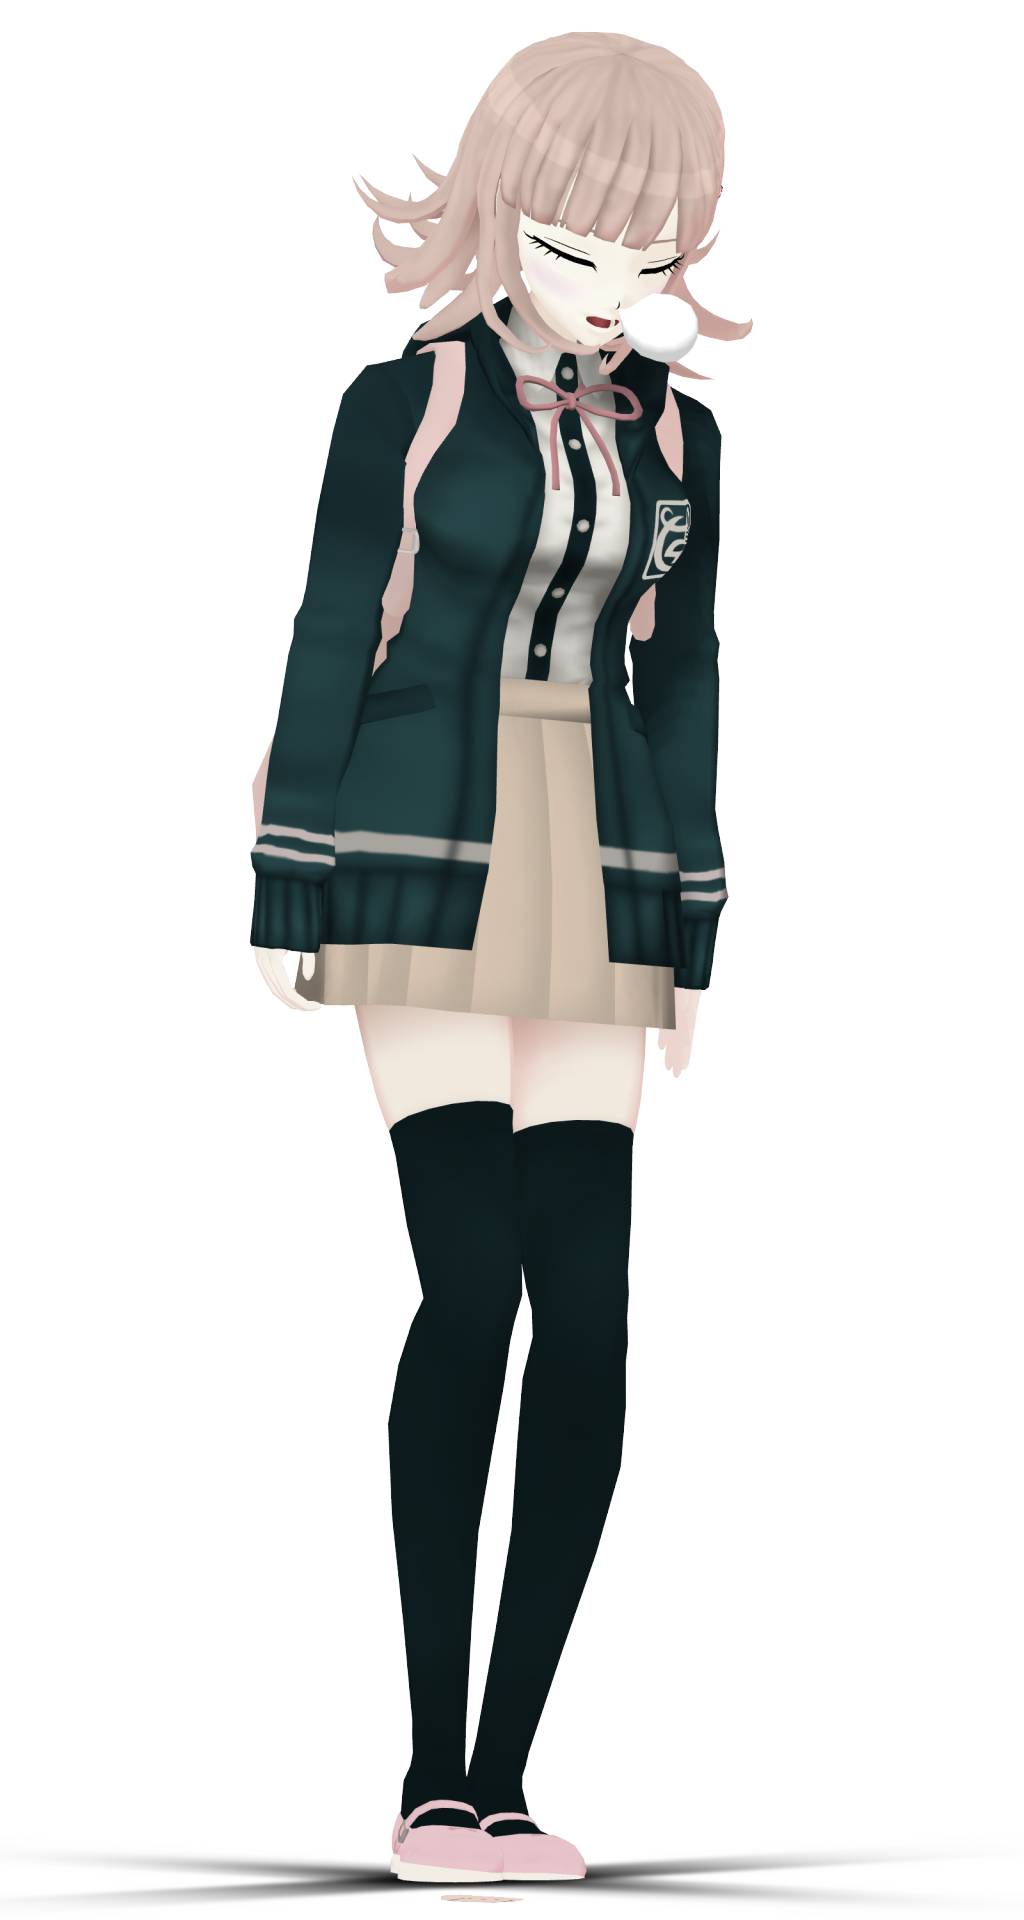 Anything Mmd And Vocaloid — Greatmmdmodels Chiaki Nanami By Afou Chiaki 